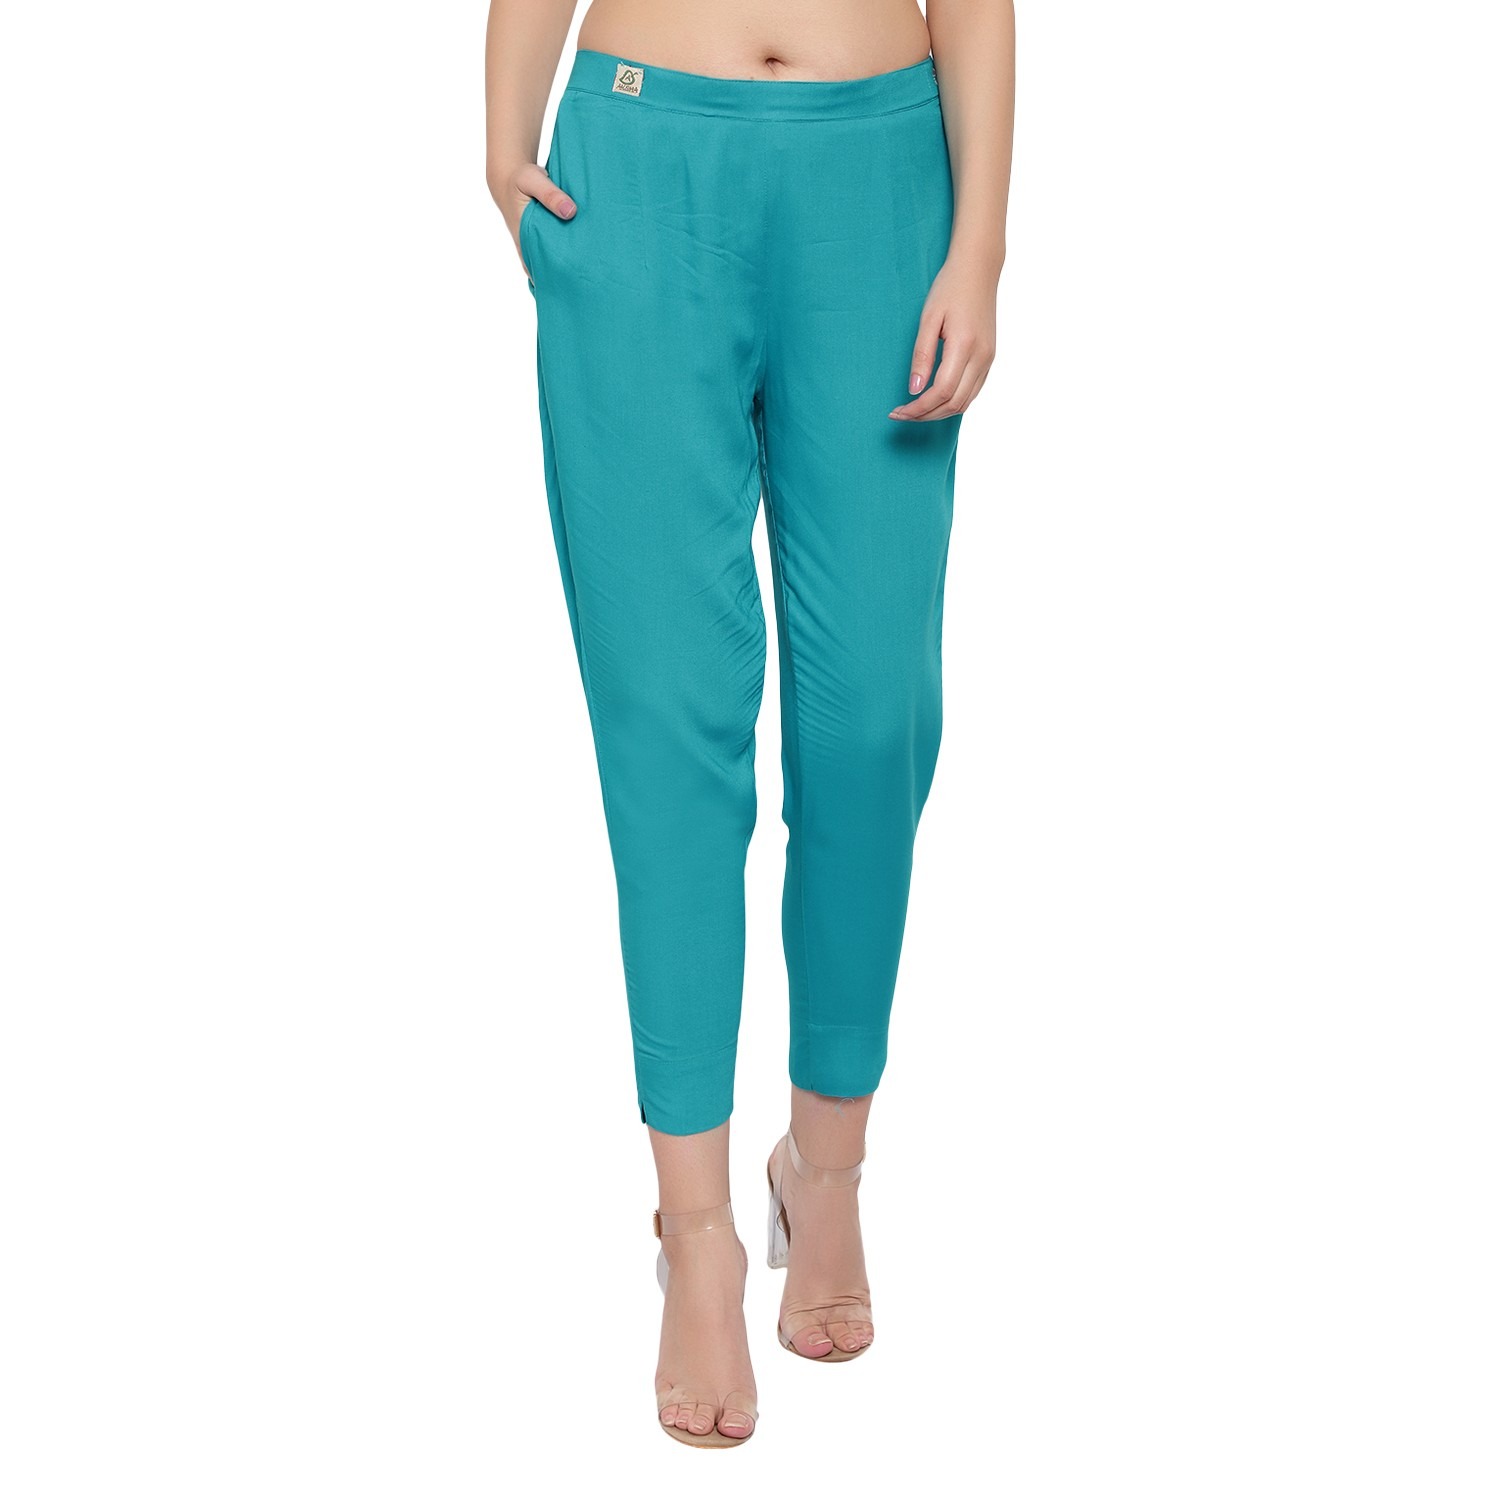 Indibelle Turquoise Blue Peg Leg Slim Fit Peg Trousers Price in India Full  Specifications  Offers  DTashioncom